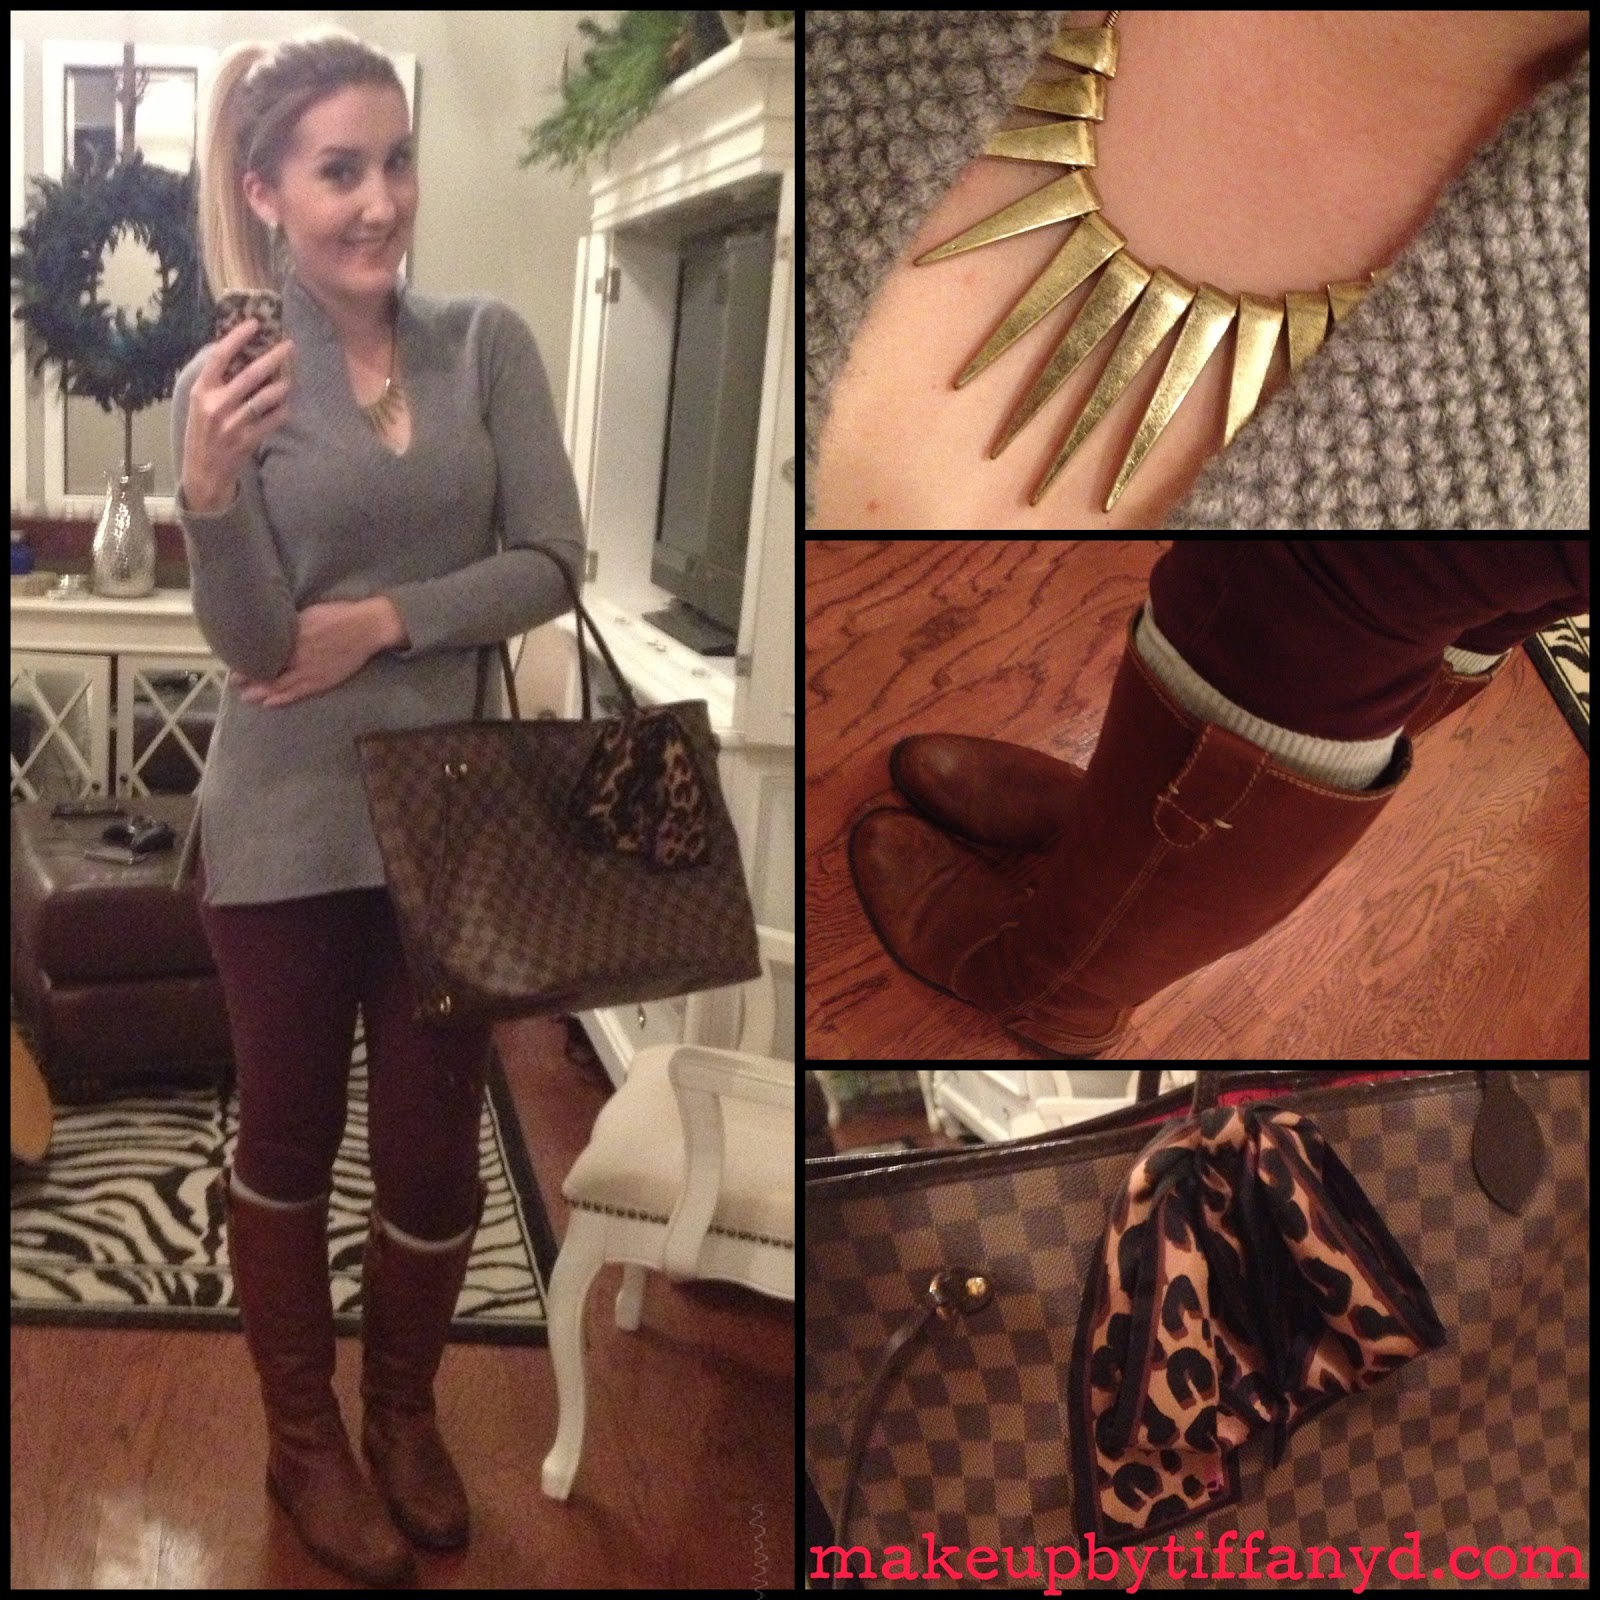 TiffanyD: Collective OOTD's (Outfits of the Day) Nov. 18-28, 2012